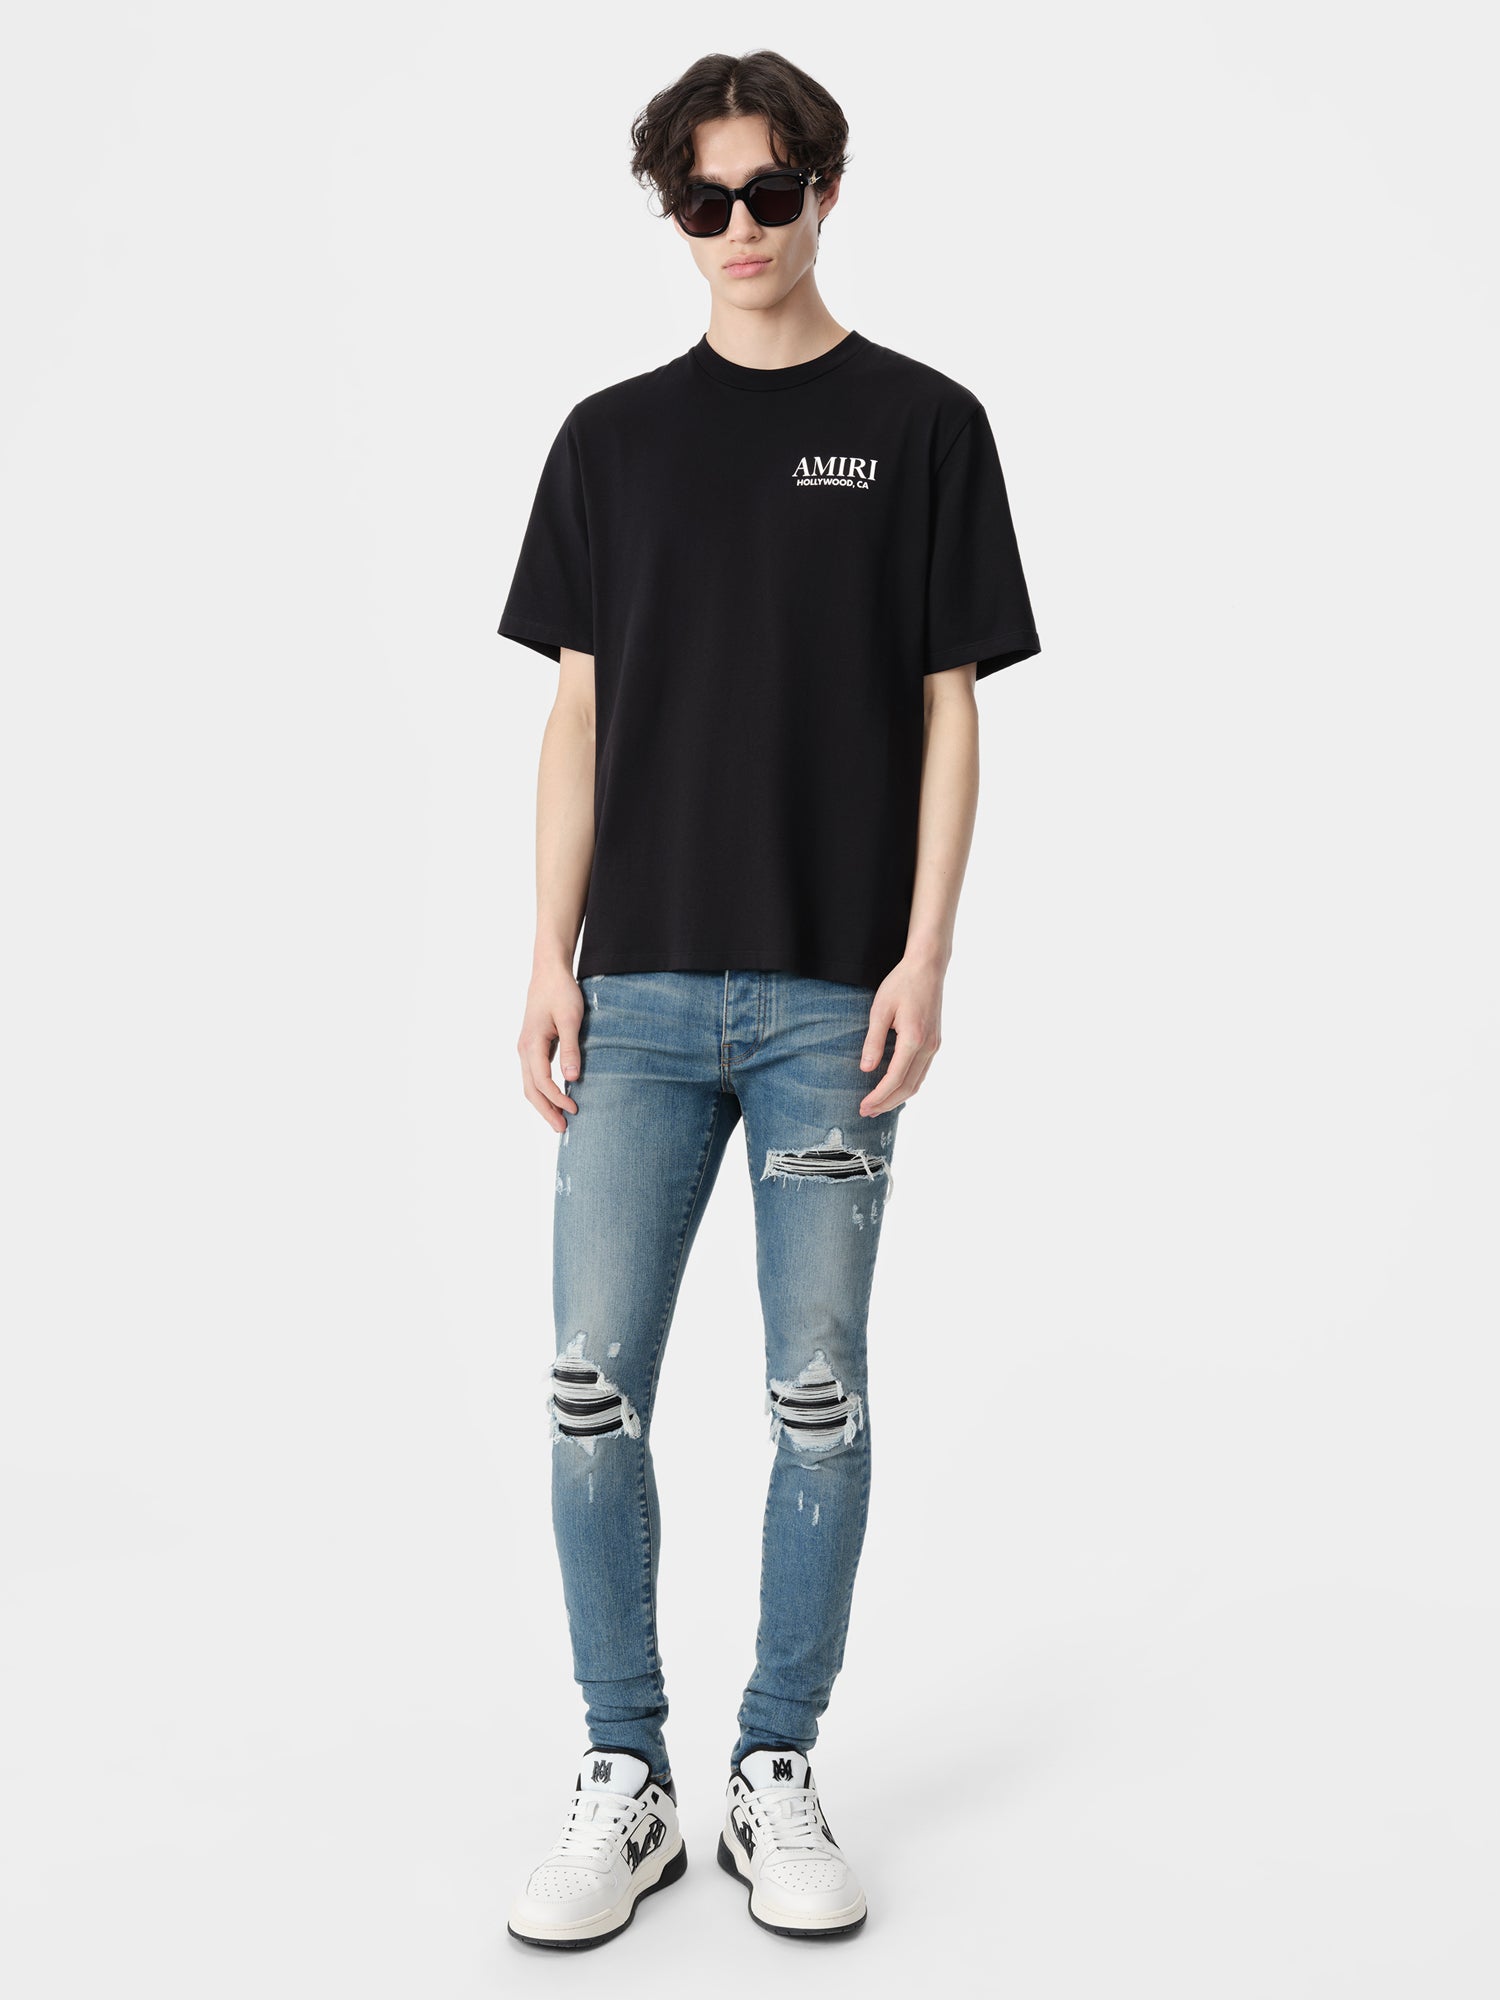 Product BONES STACKED TEE - Black featured image